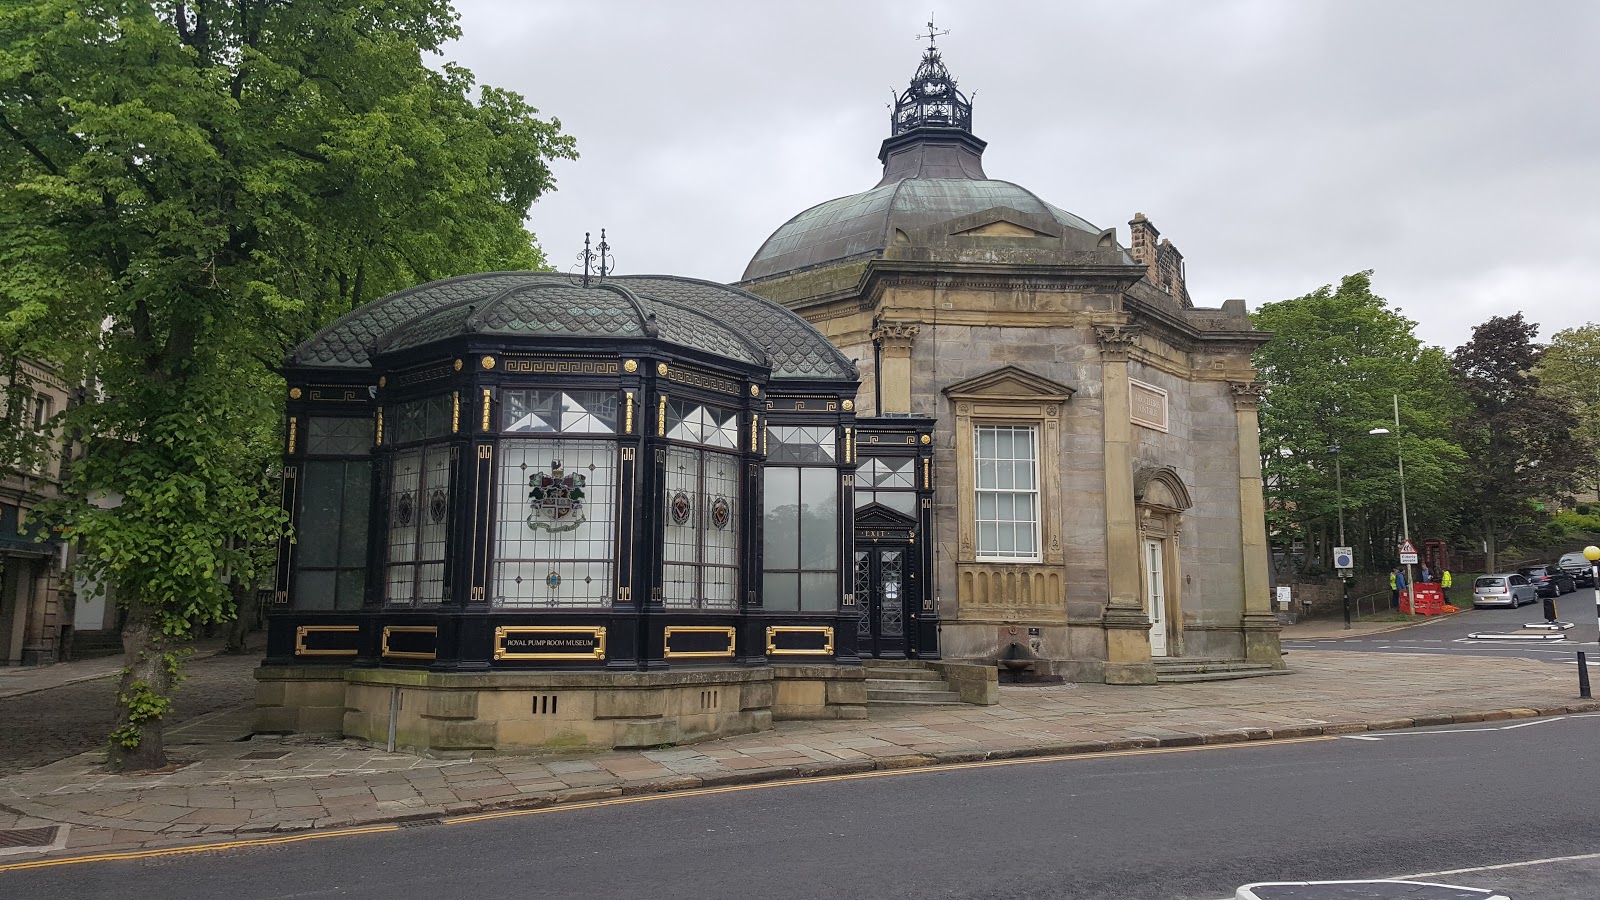 https://whatremovals.co.uk/wp-content/uploads/2022/02/Royal Pump Room Museum-300x169.jpeg